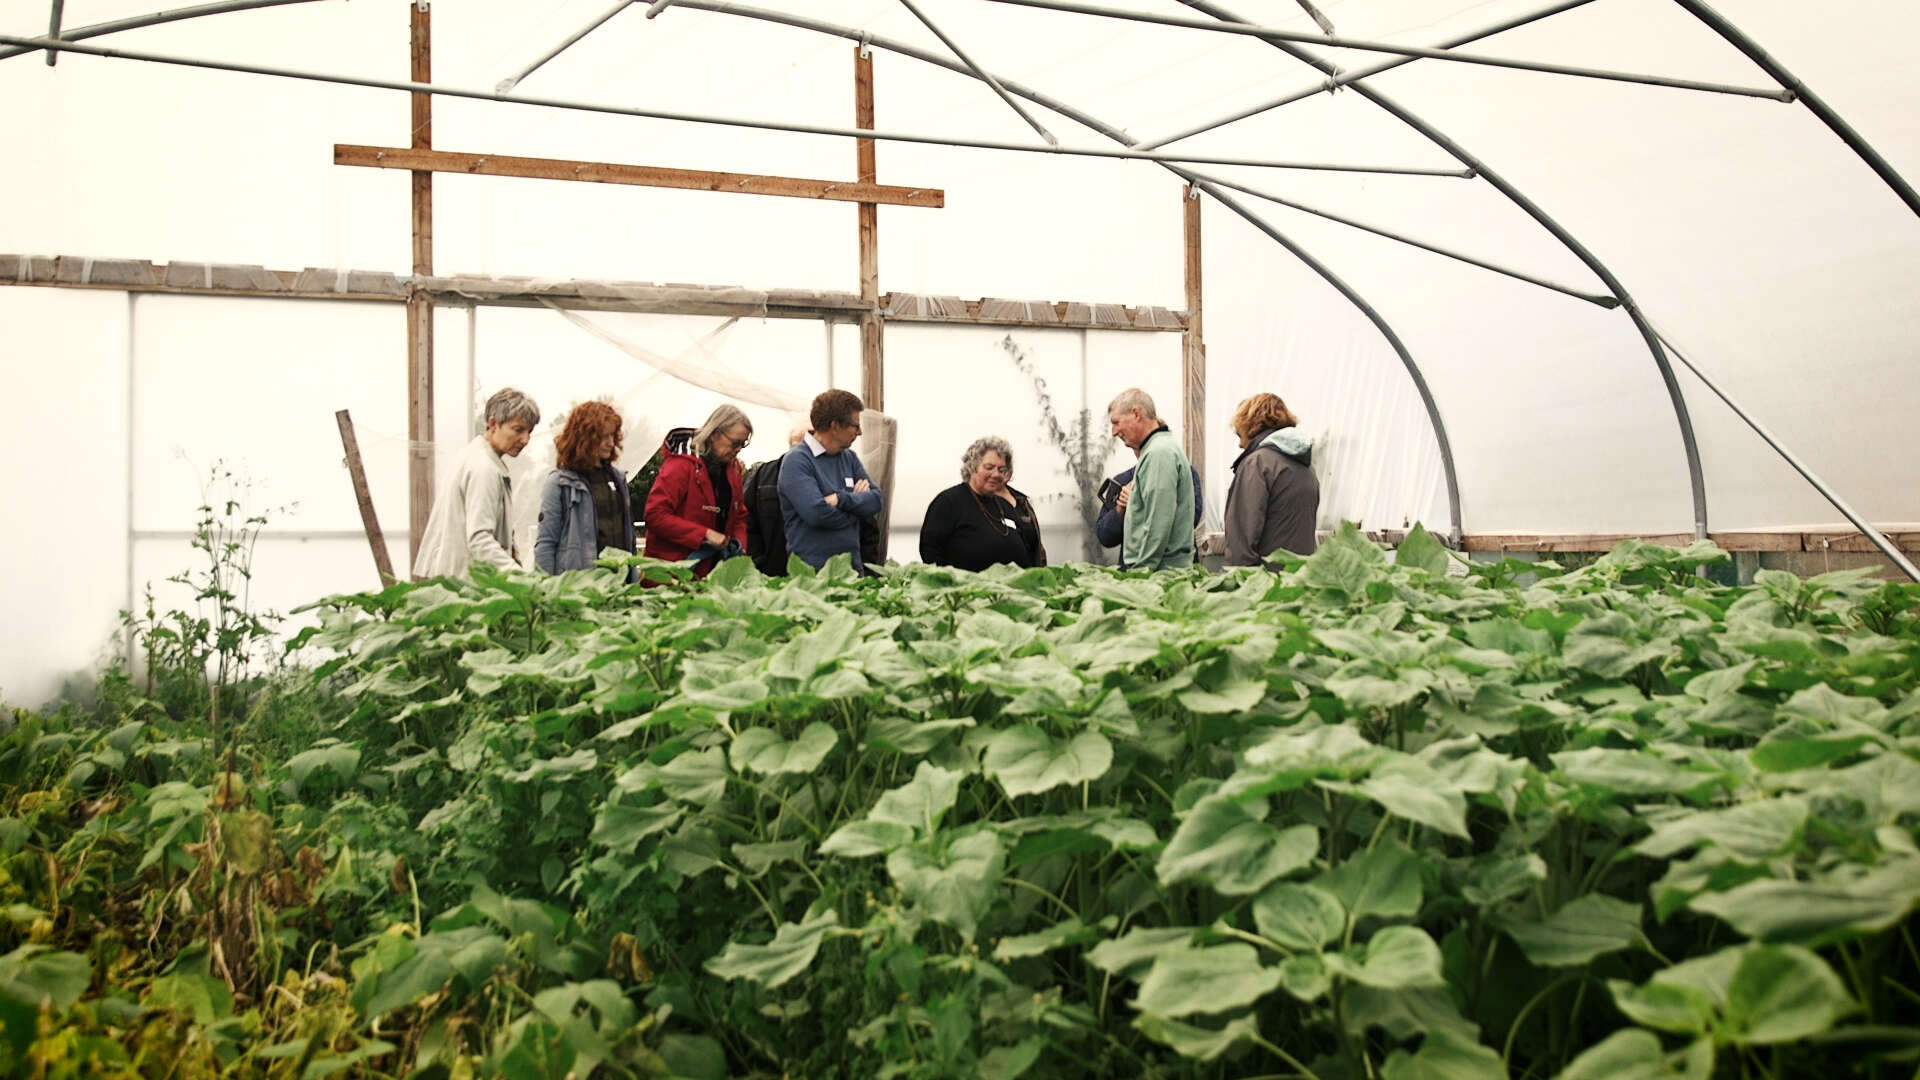 Members of Garden Organic standing in a polytunnel full of plants.